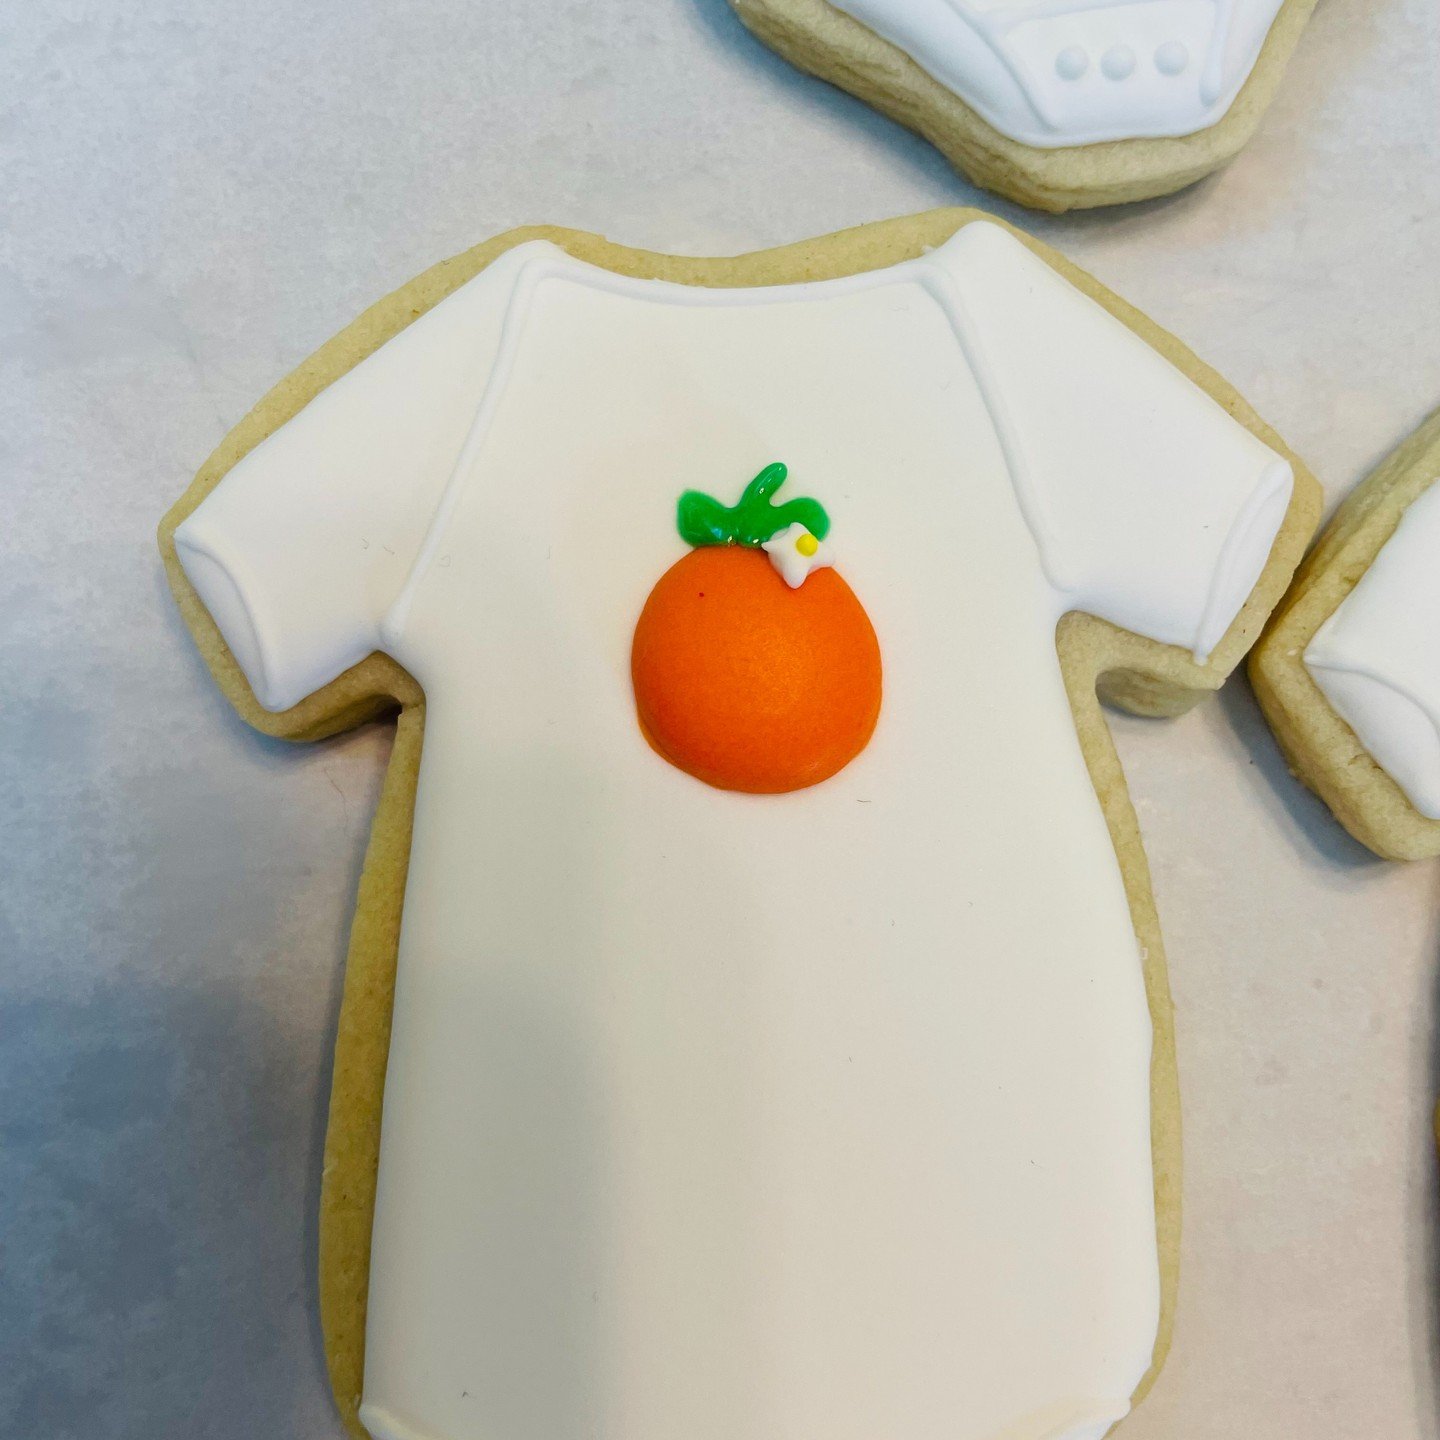 Welcoming Moms to the Baby Bottom Dollar Sale in Salem, OR this October. Come and check out our baby shower themed sugar cookies! 
October 25th - 29th
Sale LOCATION: Salem
The Oregon State Fairgrounds,
Columbia Hall Building
2330 17th St NE, Salem, O